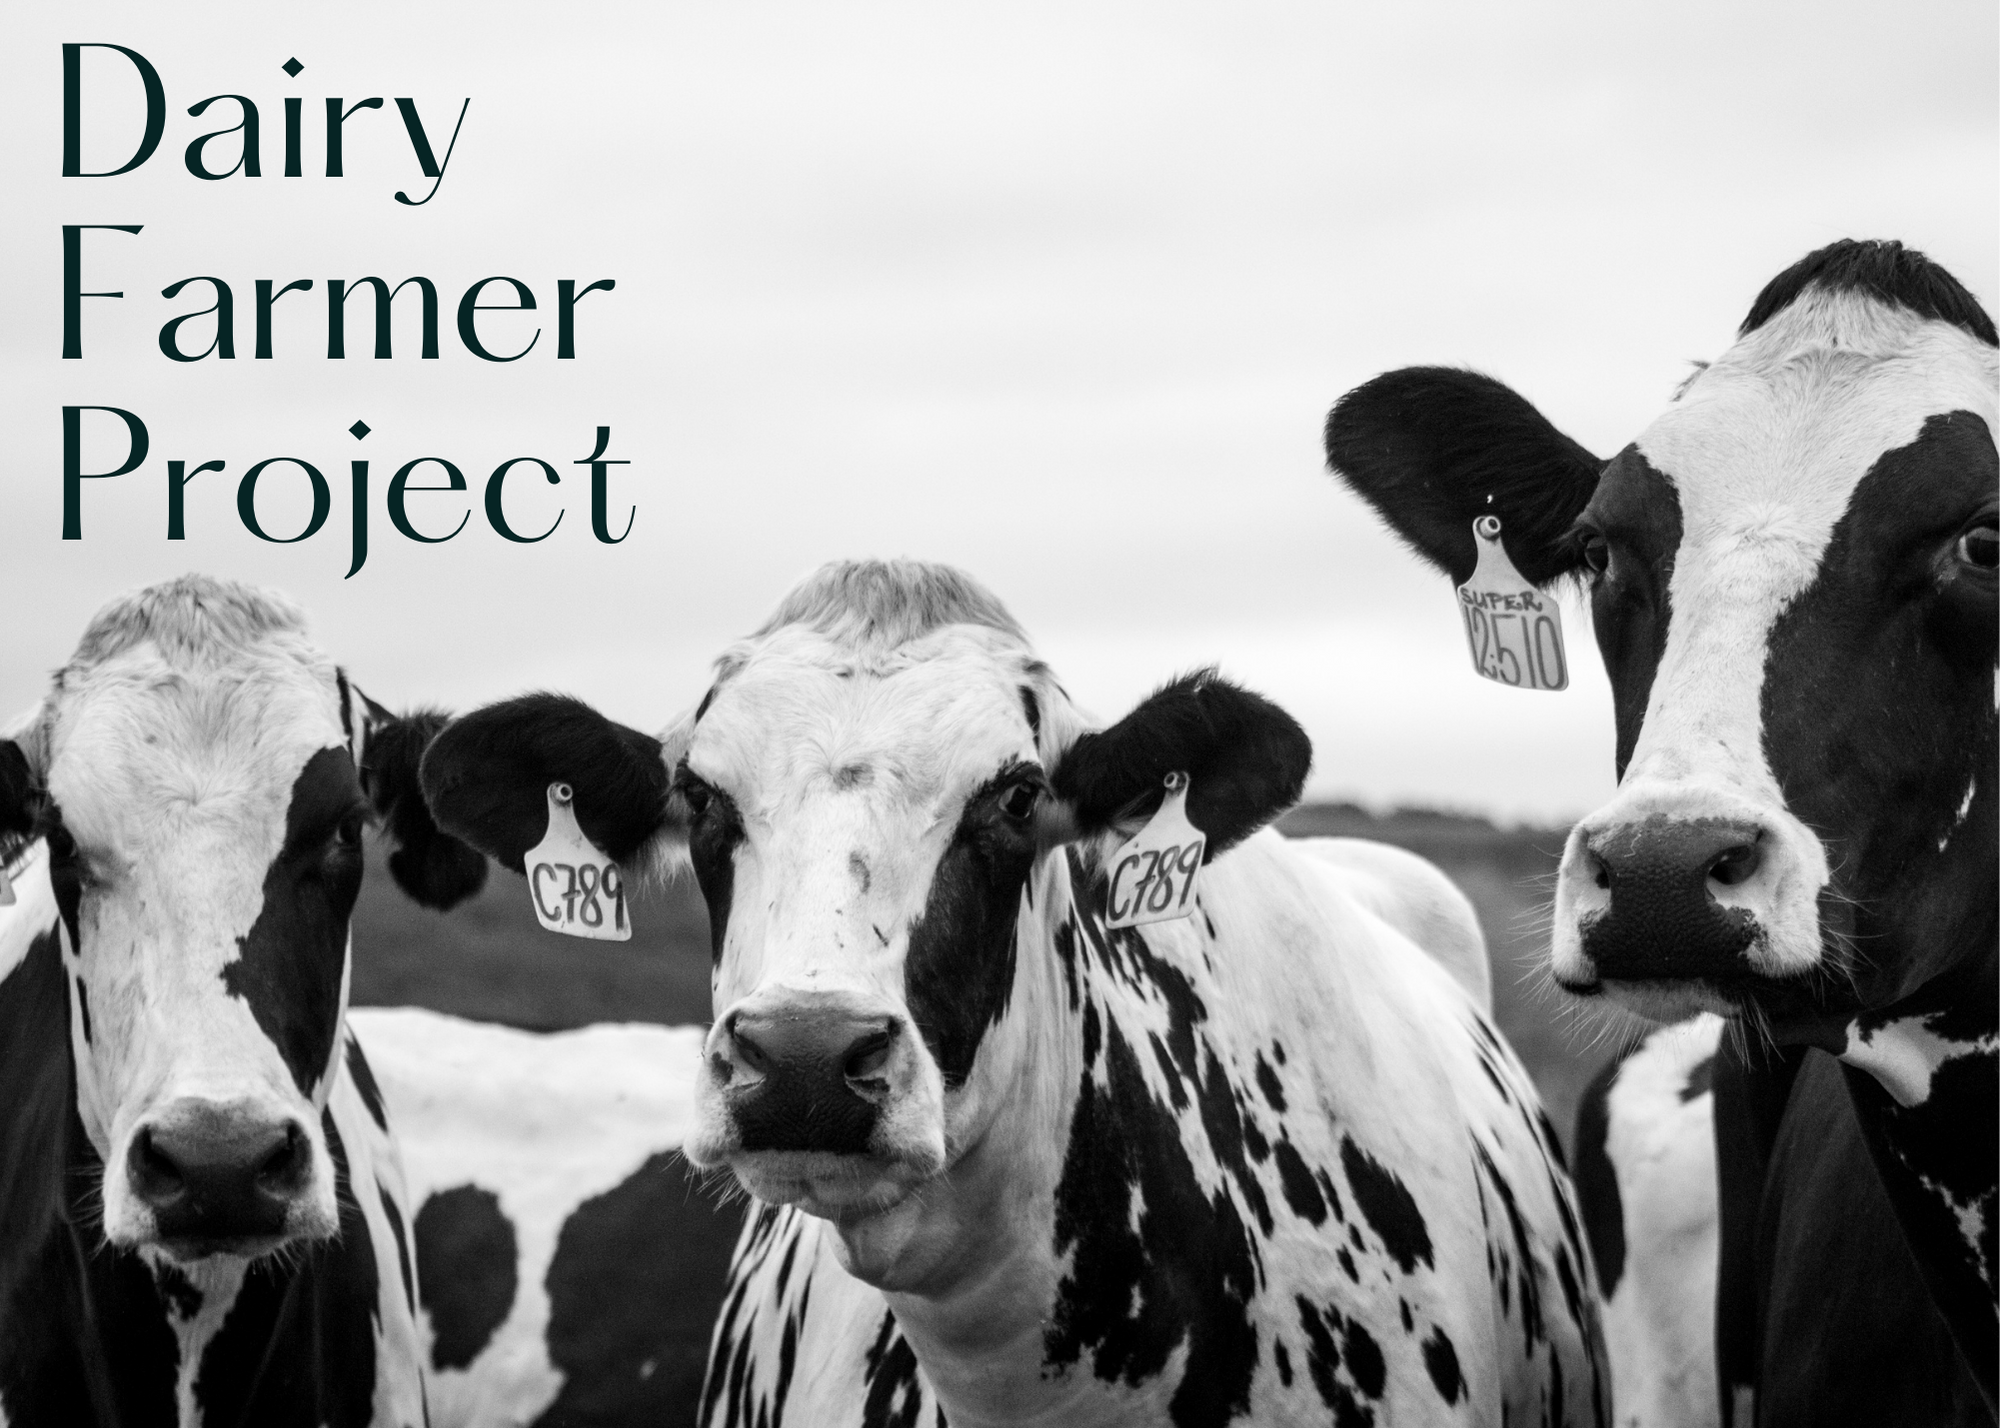 Dairy Farmer Project reading